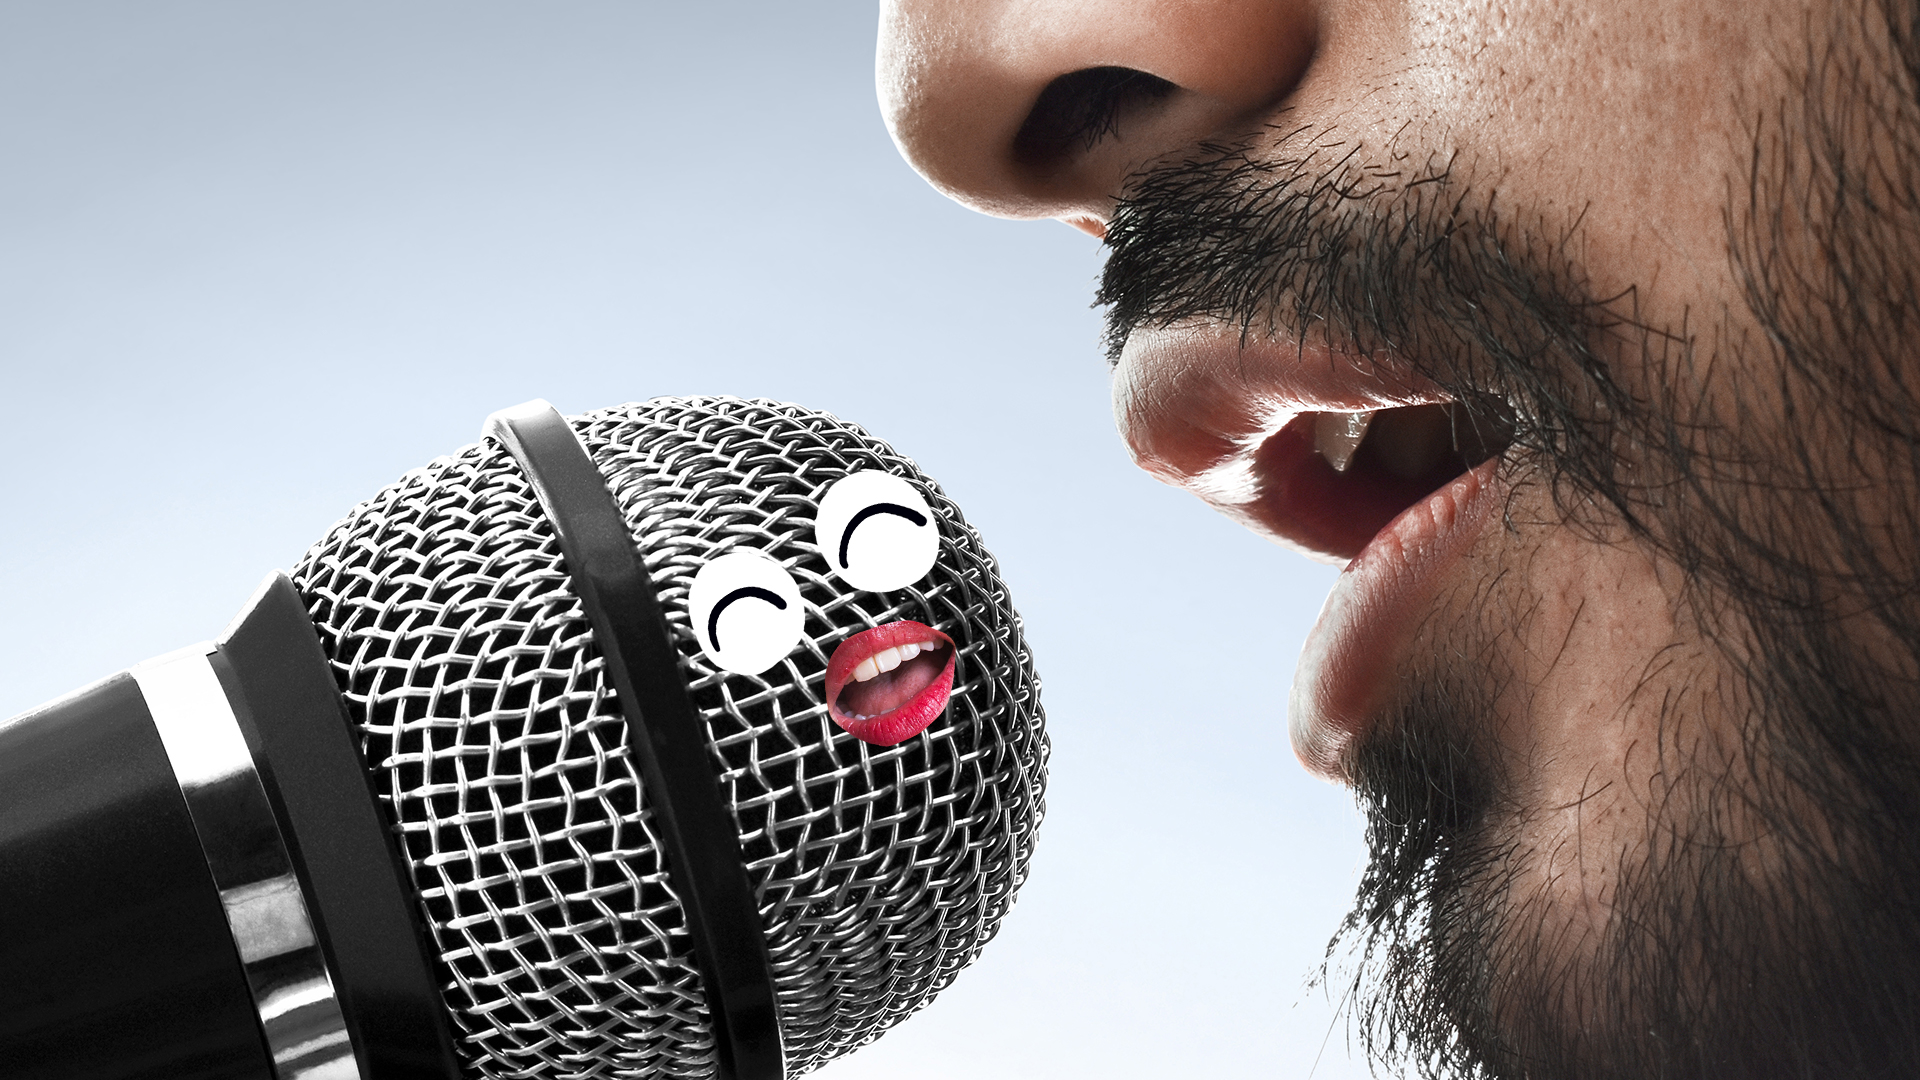 A man speaking into a microphone